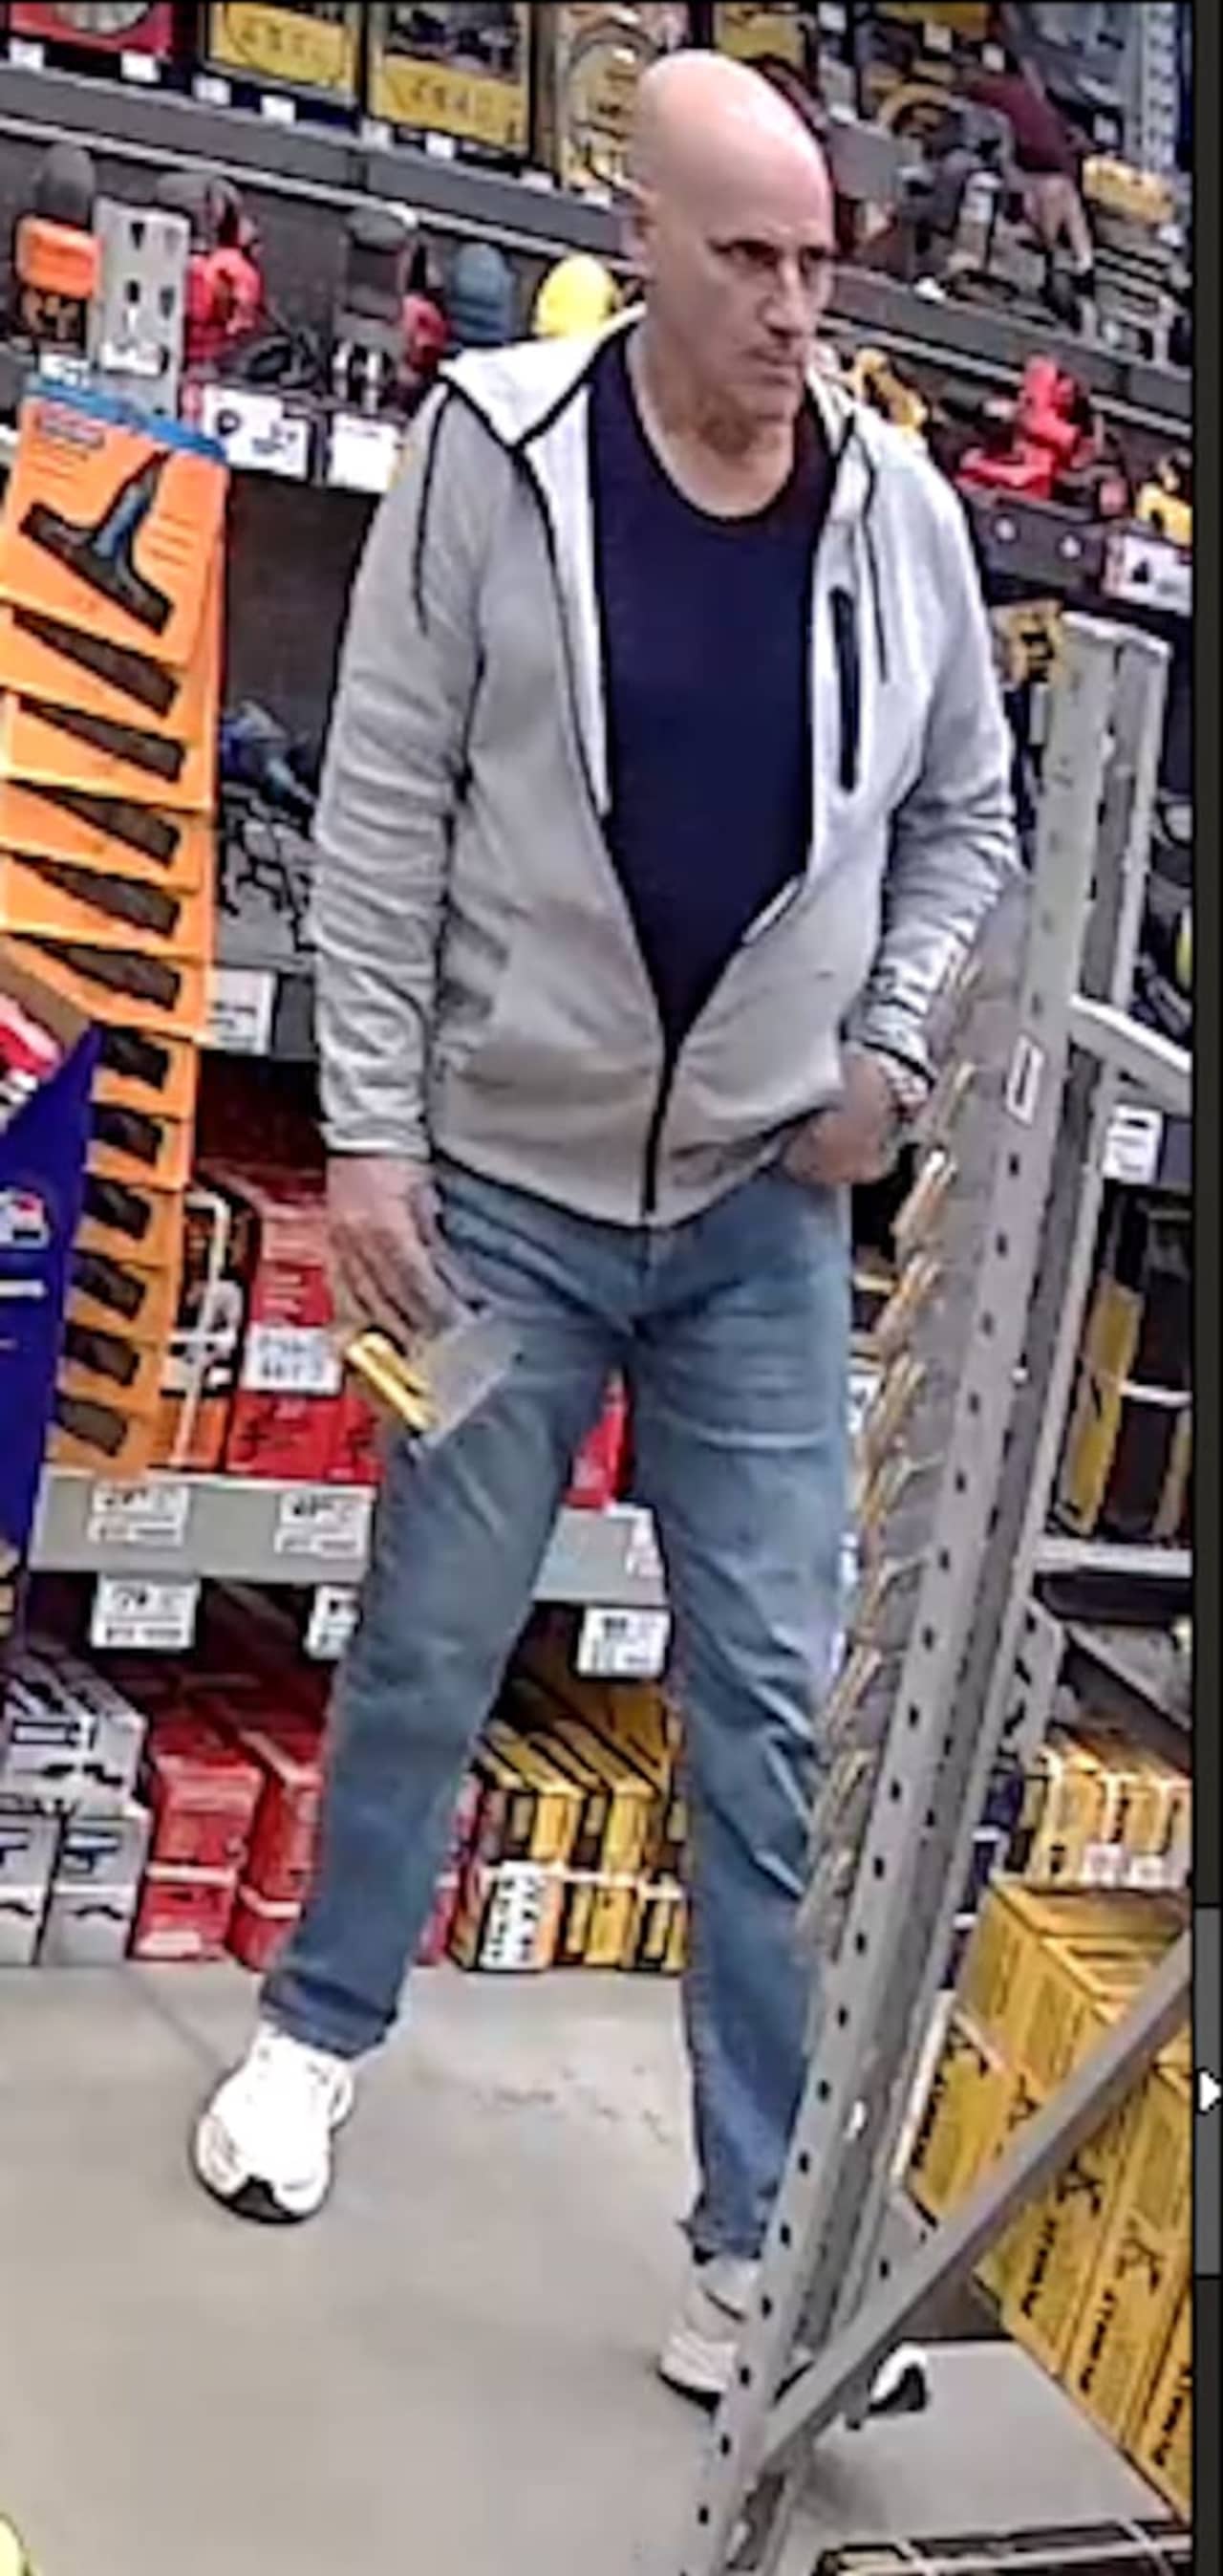 A man allegedly stole Dewalt batteries from Lowes in Bay Shore.